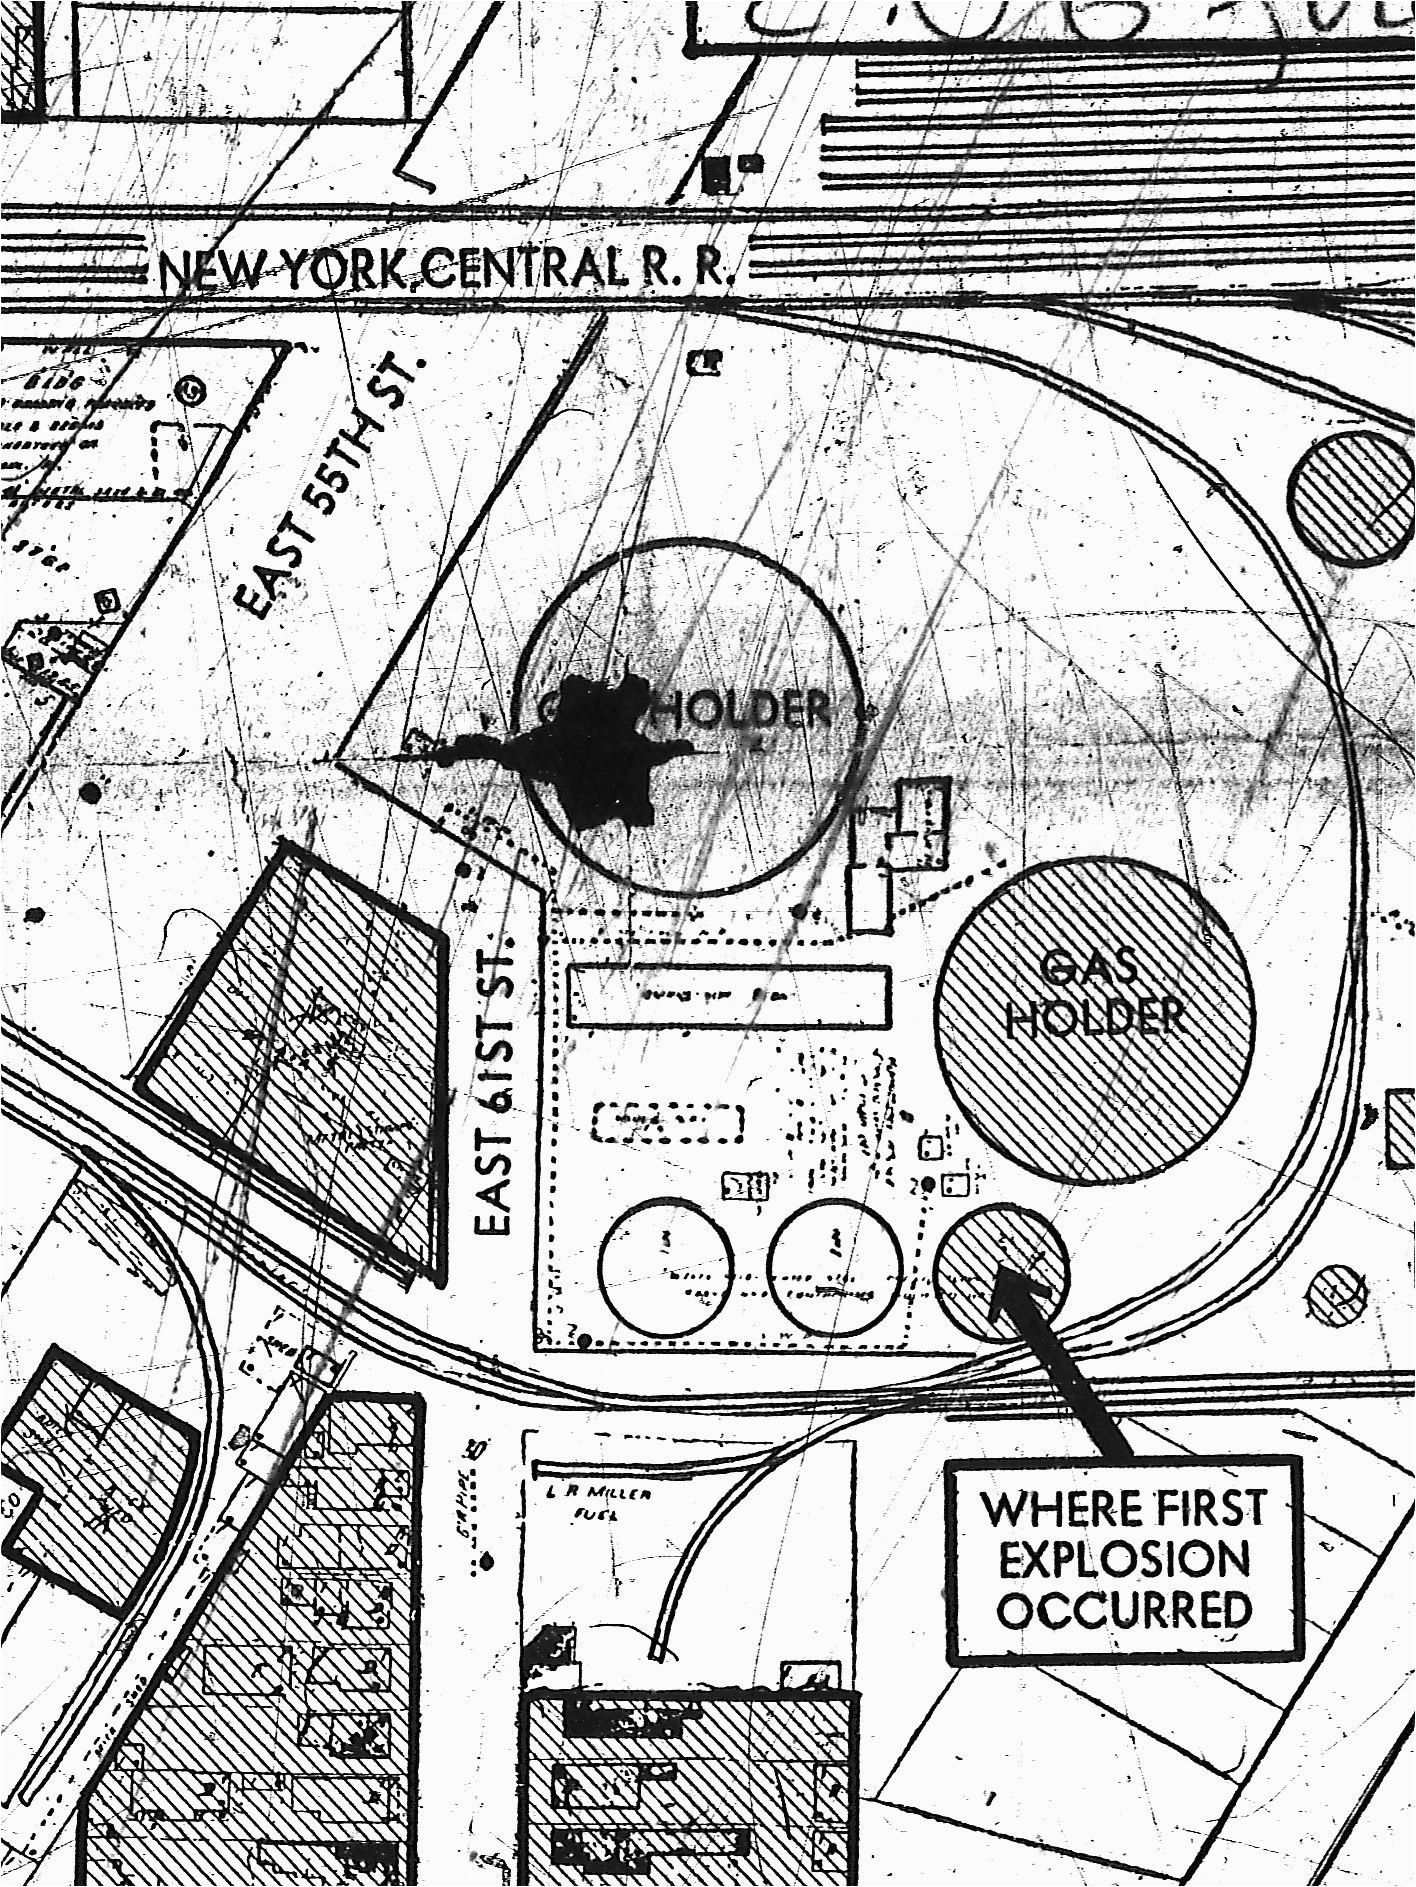 1944 cleveland east ohio gas explosion map my home town circa